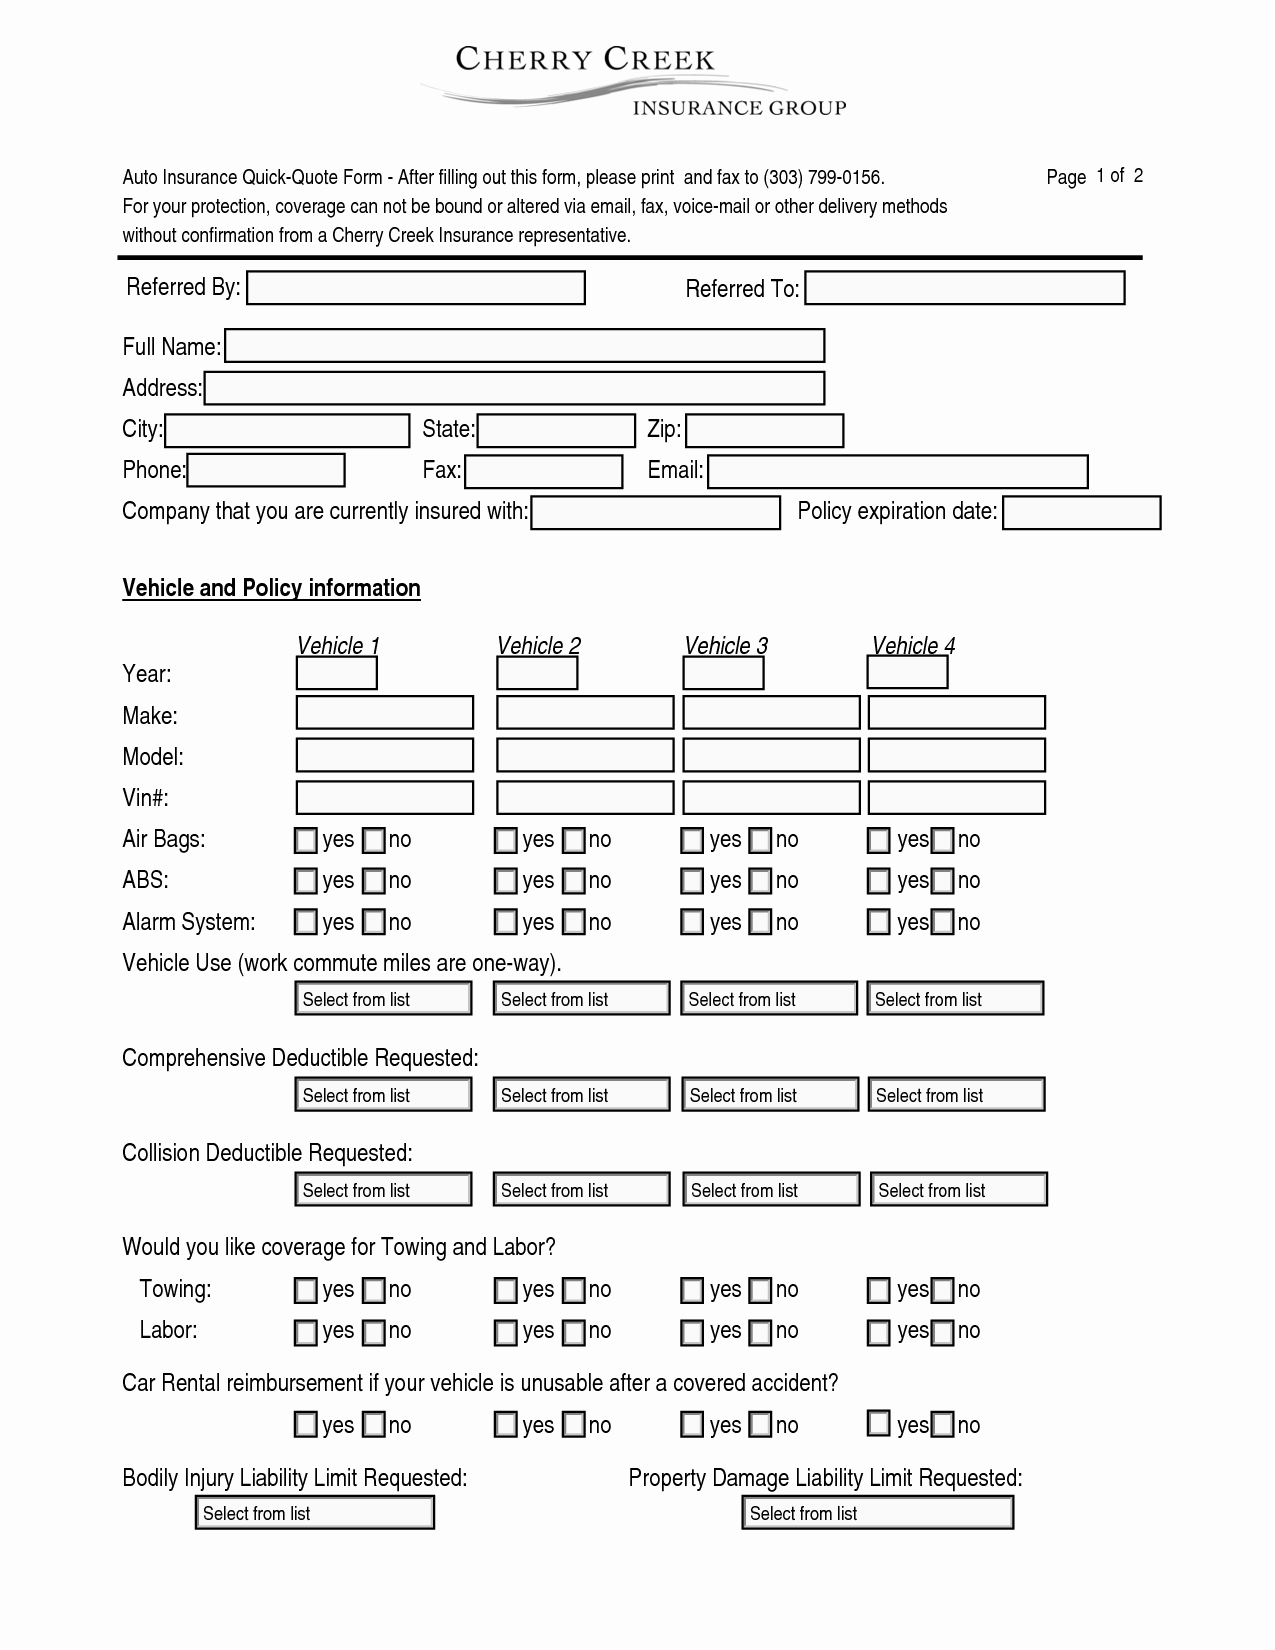 Home Insurance Quote Sheet Fresh 20 Life Insurance Quote form and S